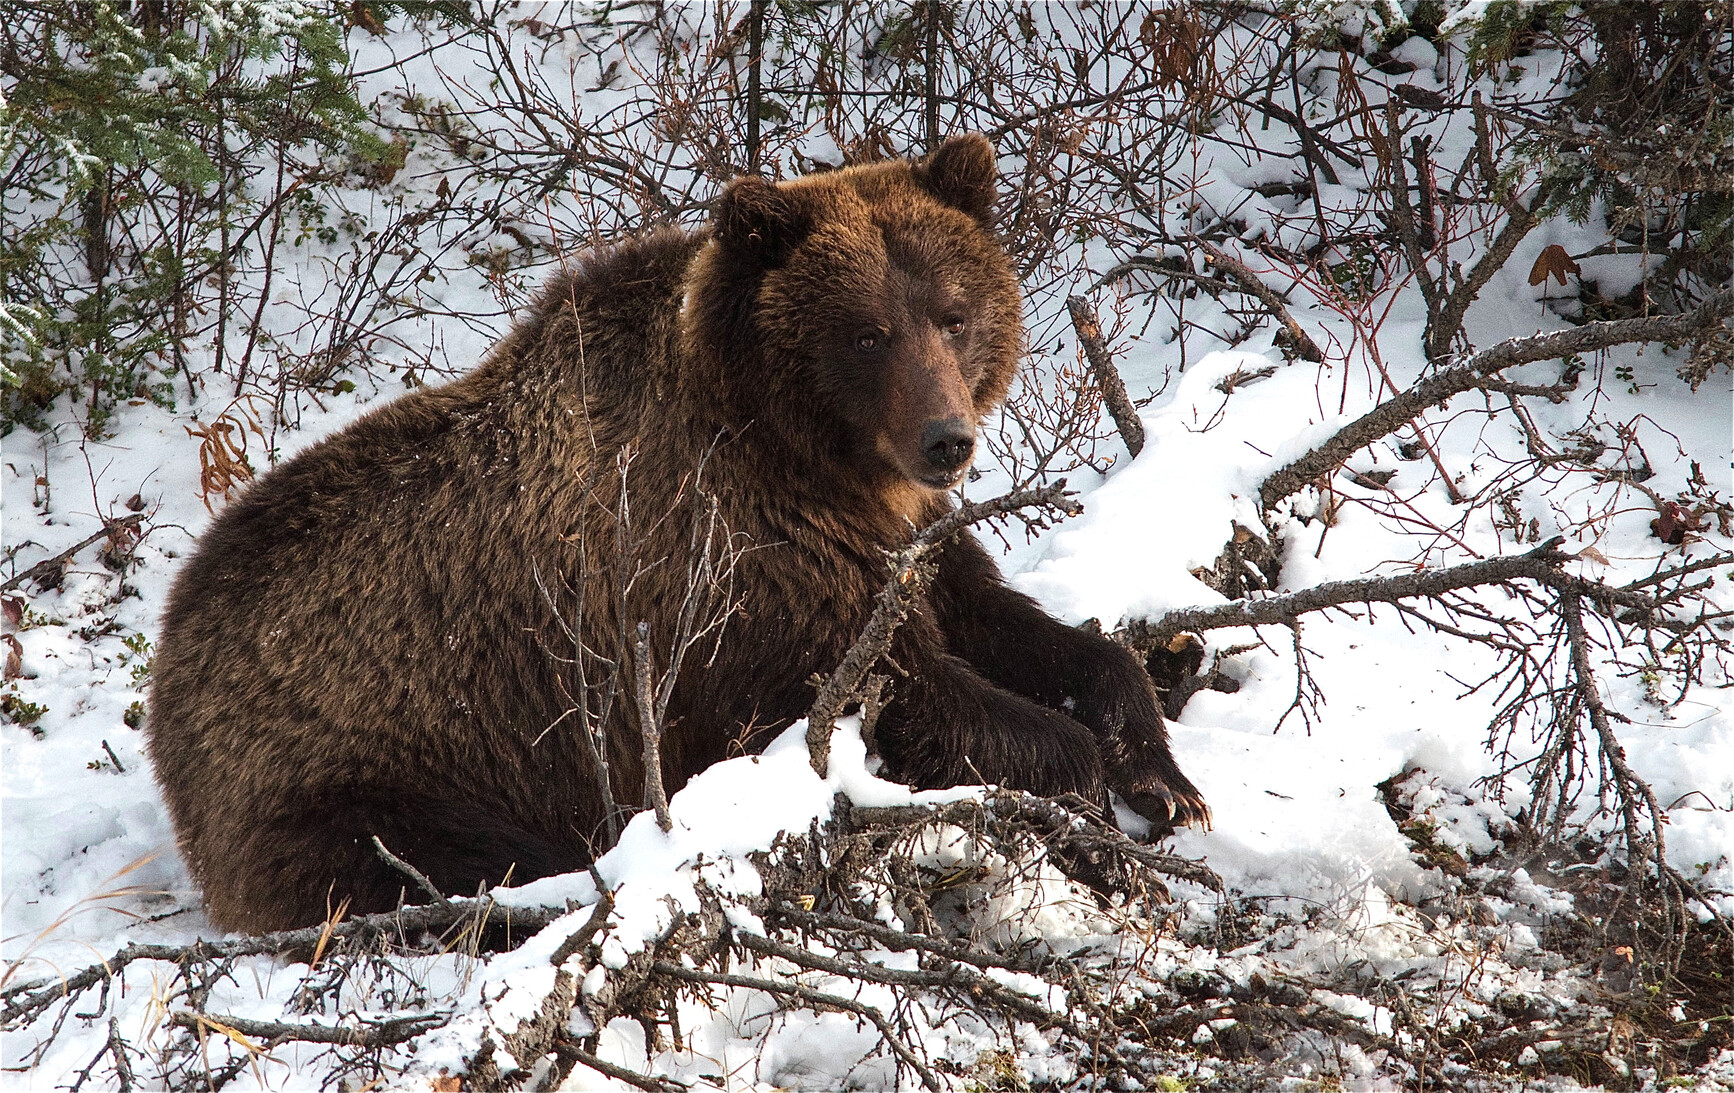 A grizzly bear (Ursus arctos horribilis) in the snowy forest. Liard Hot Springs Park. 